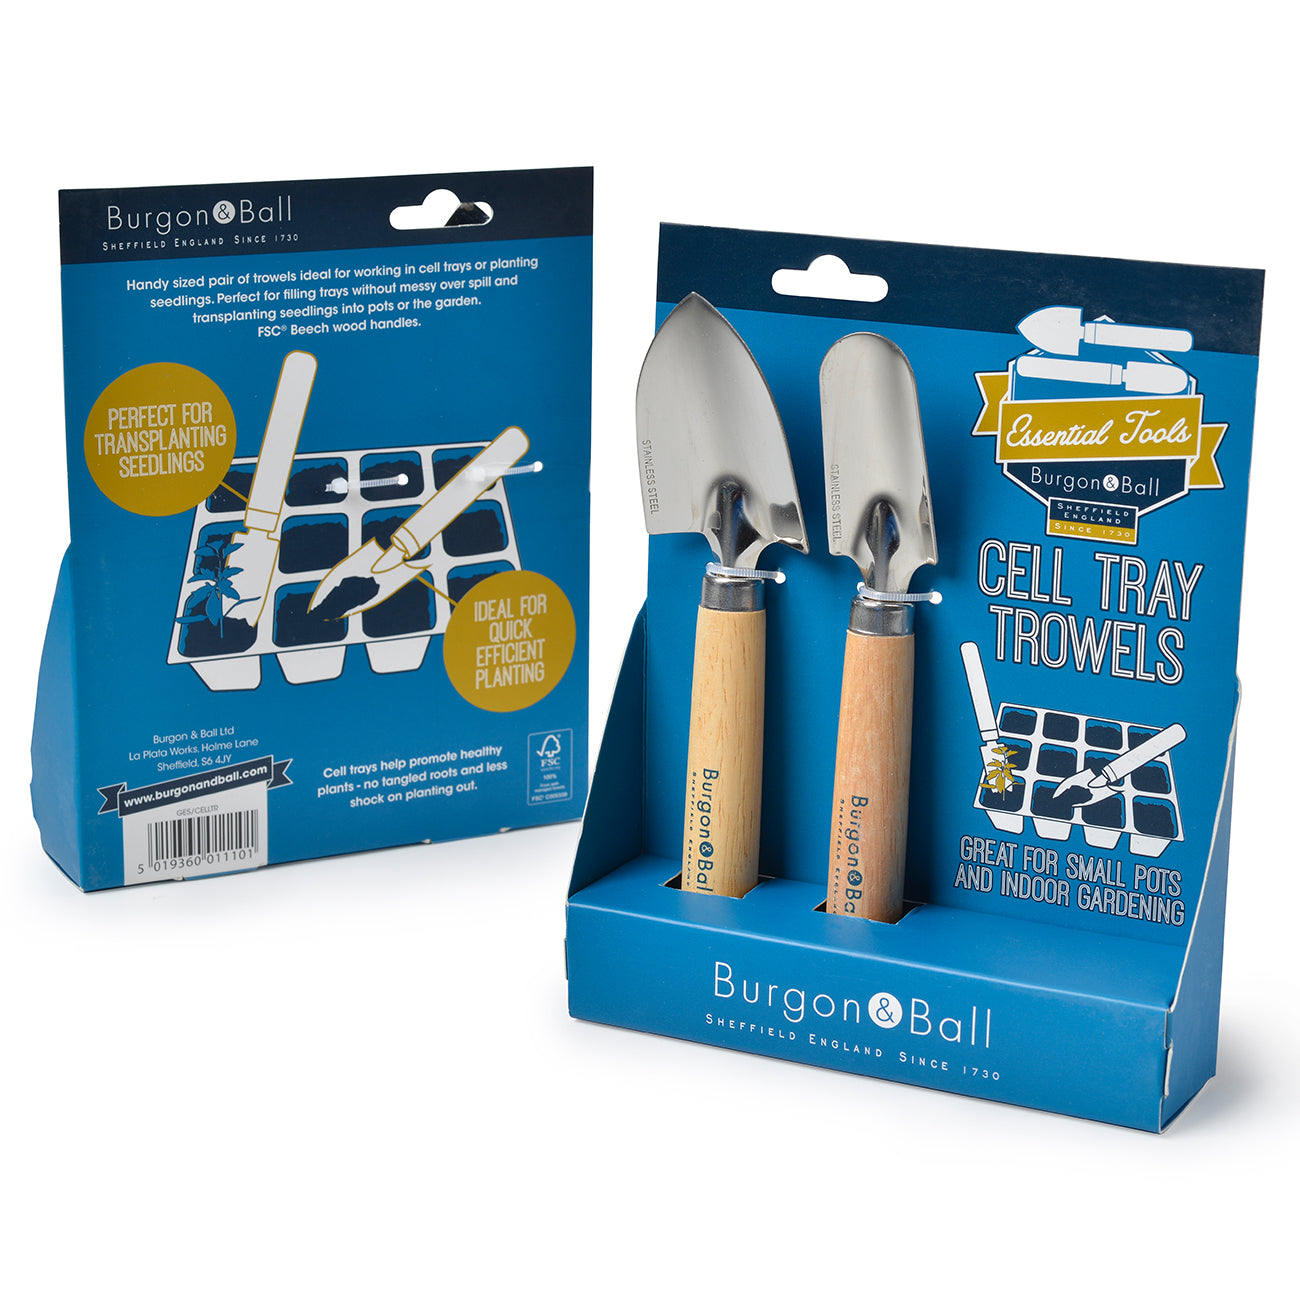 Burgon & Ball boxed cell tray trowels.